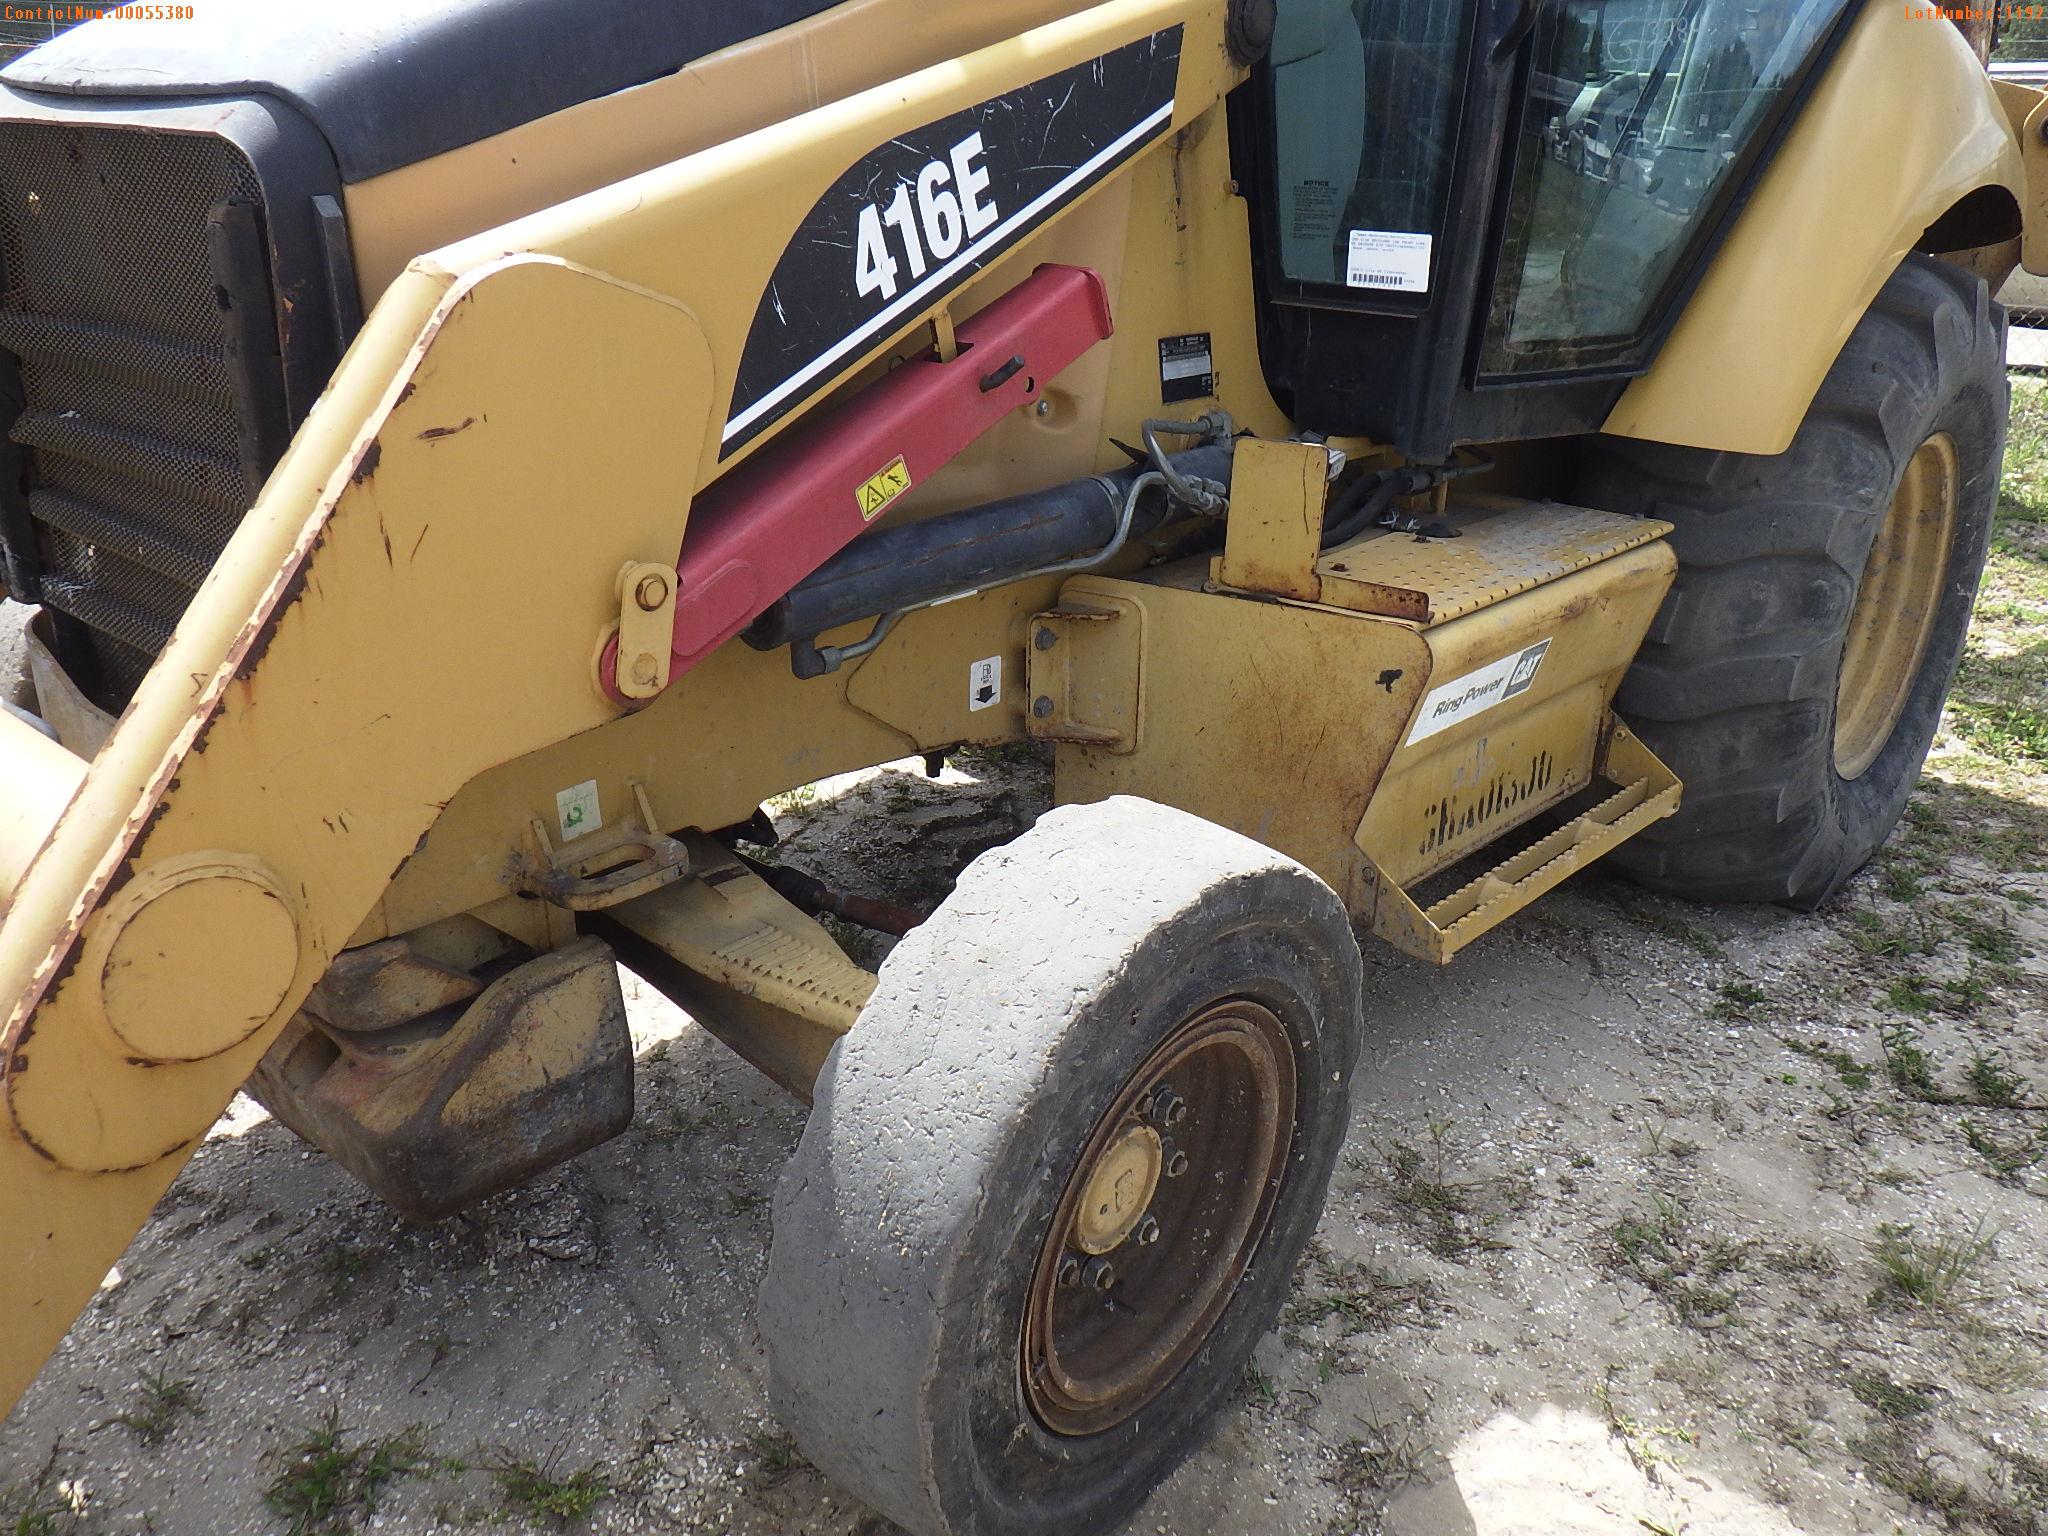 5-01192 (Equip.-Backhoe)  Seller: Gov-City Of Clearwater CAT 416E ENCLOSED CAB T